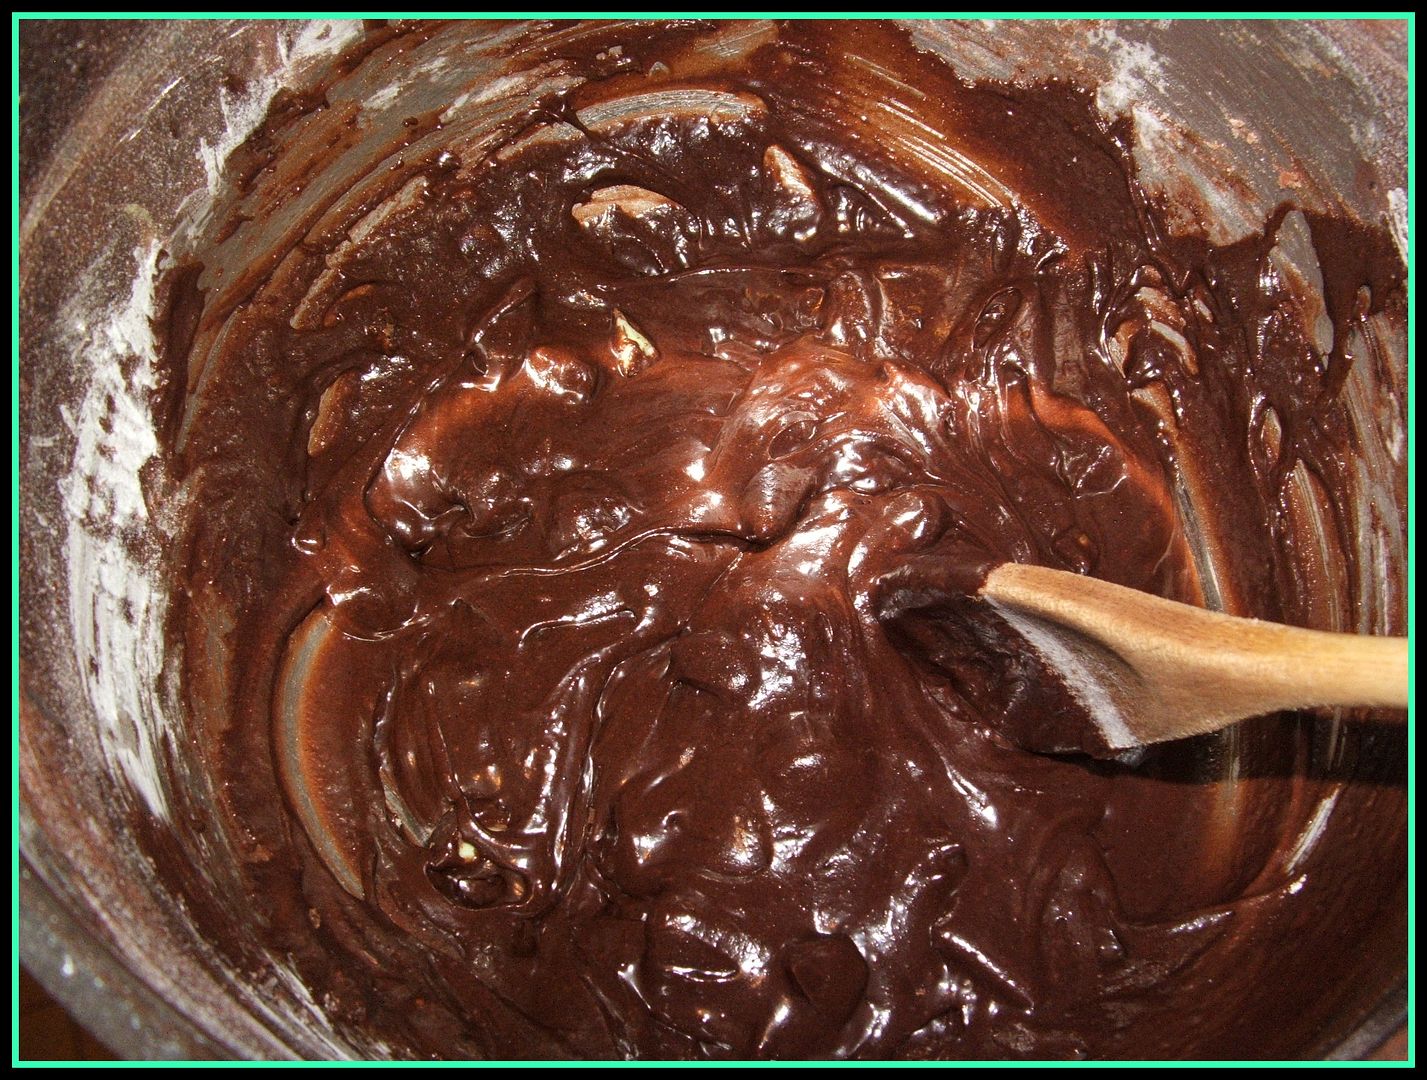 Mint Kissed Cocoa Brownies by Angie Ouellette-Tower for godsgrowinggarden.com photo 023_zps658638de.jpg